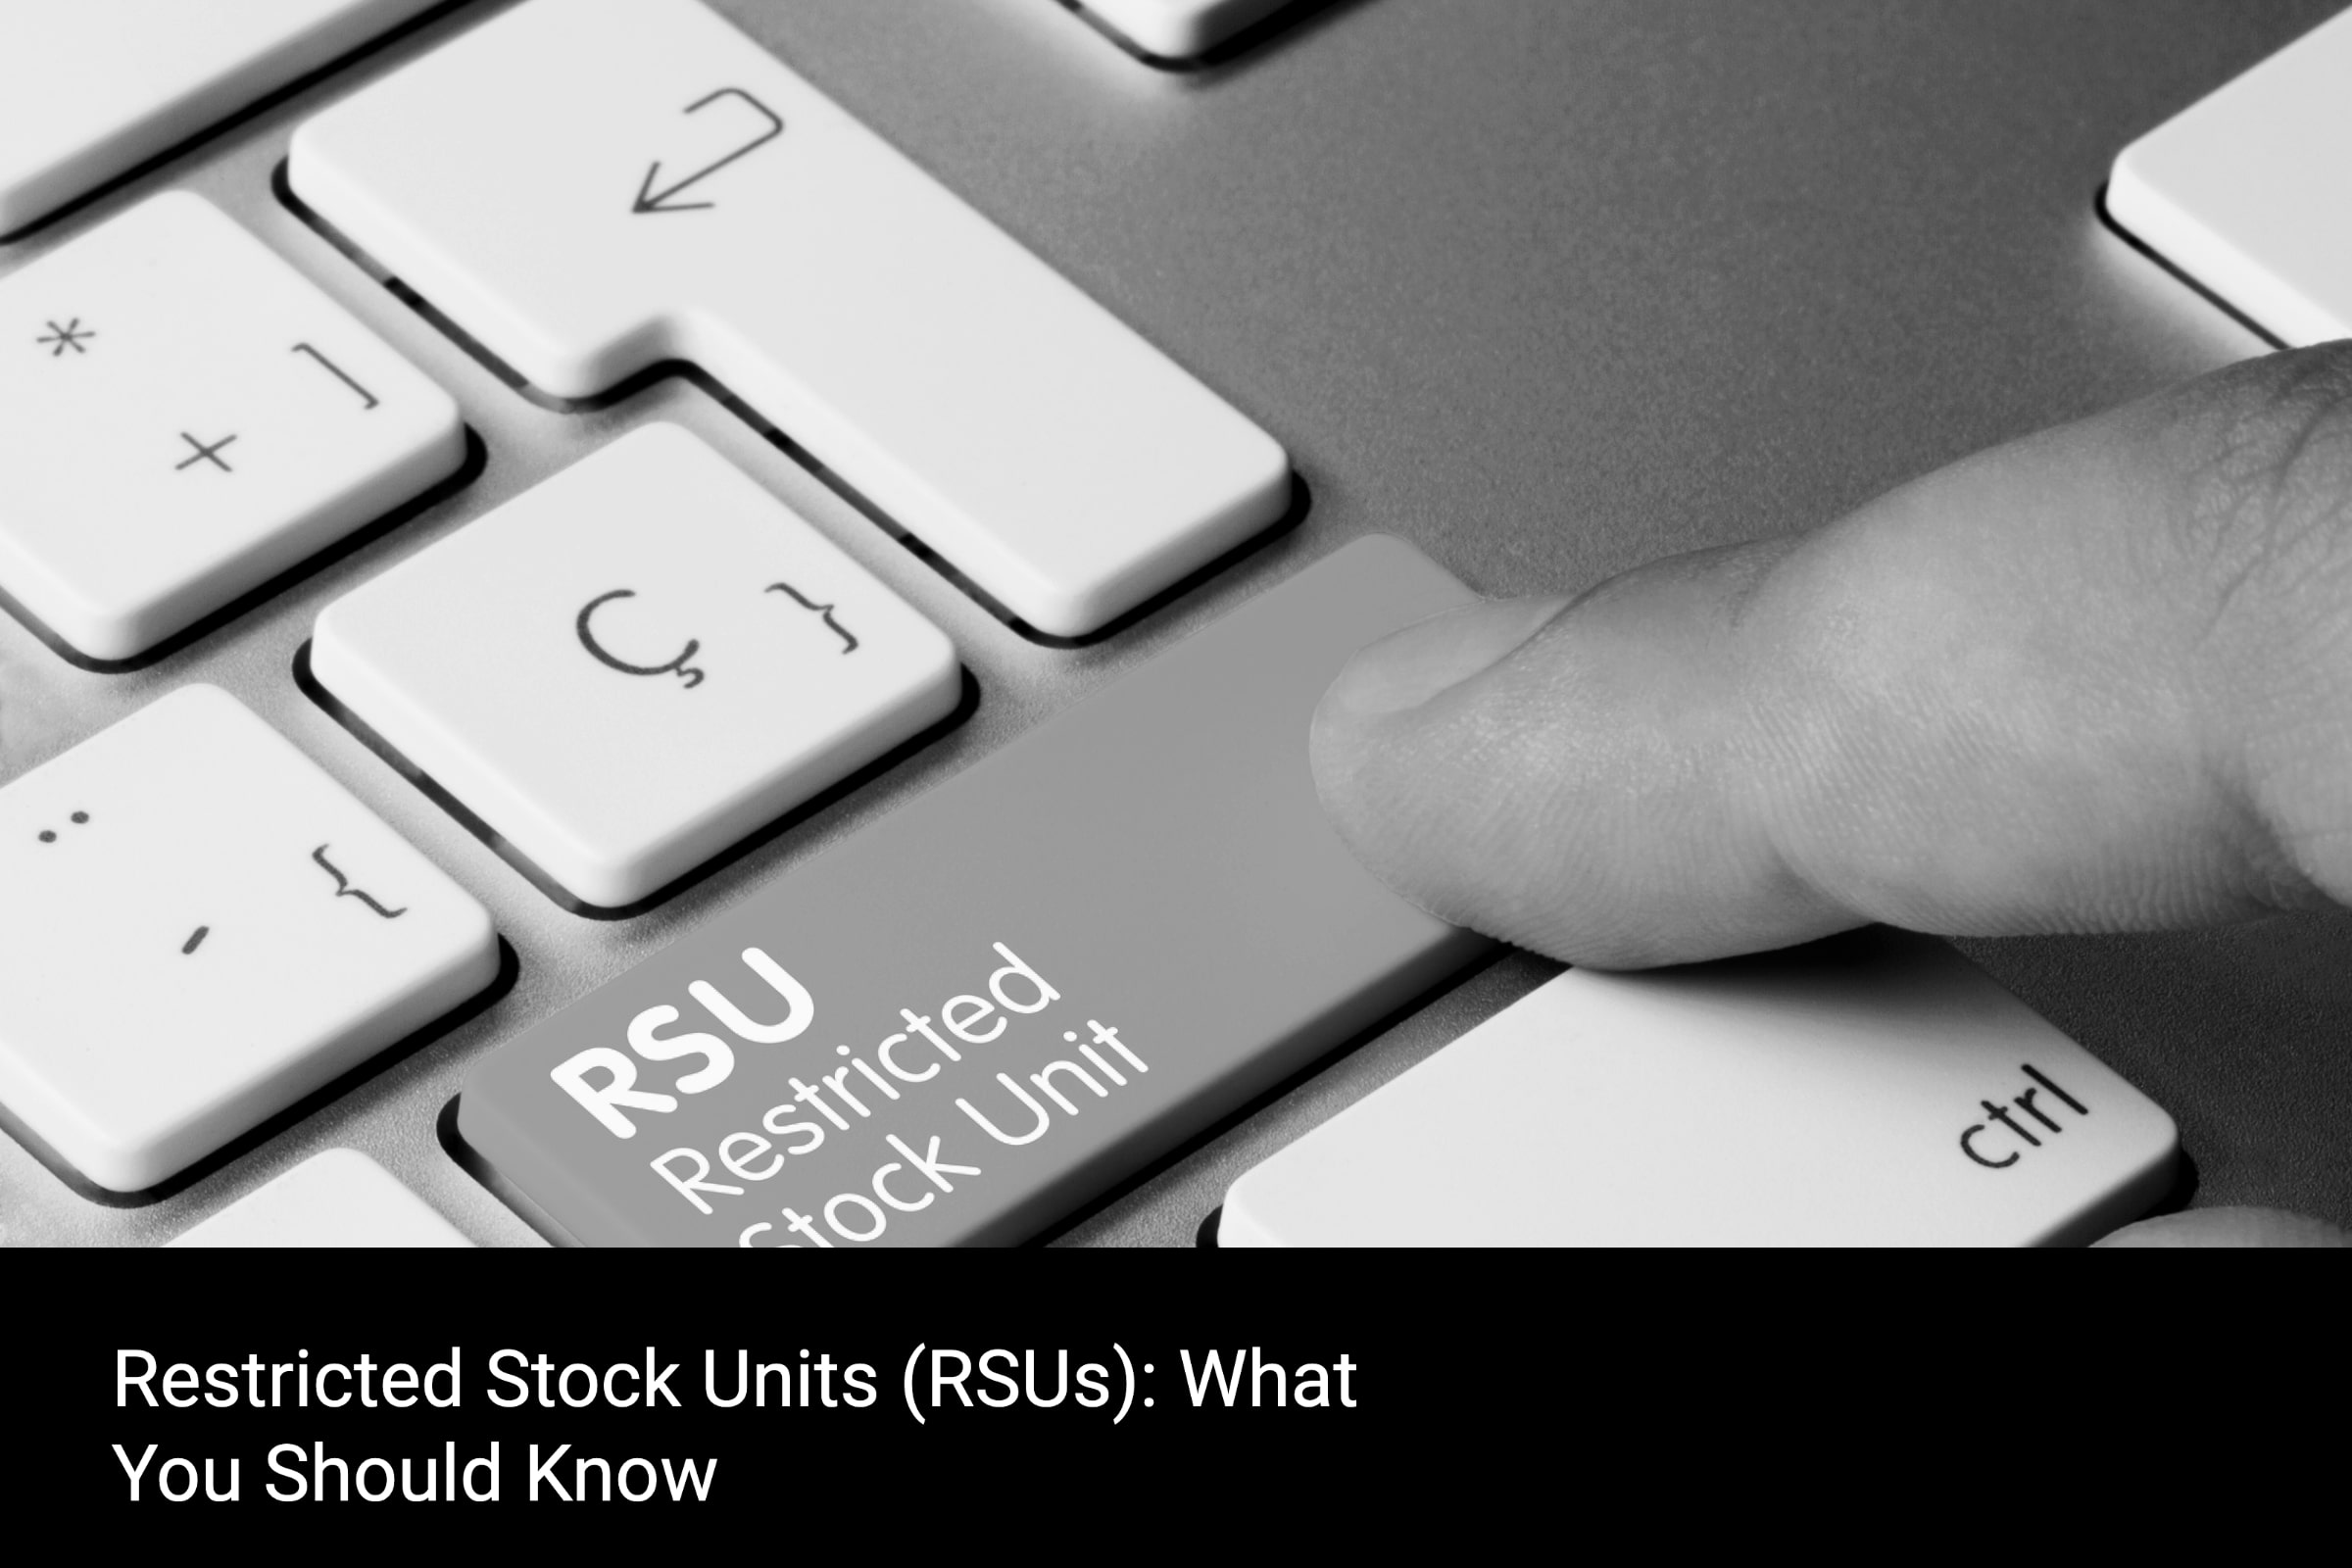 Restricted Stock Units (RSUs): What You Should Know